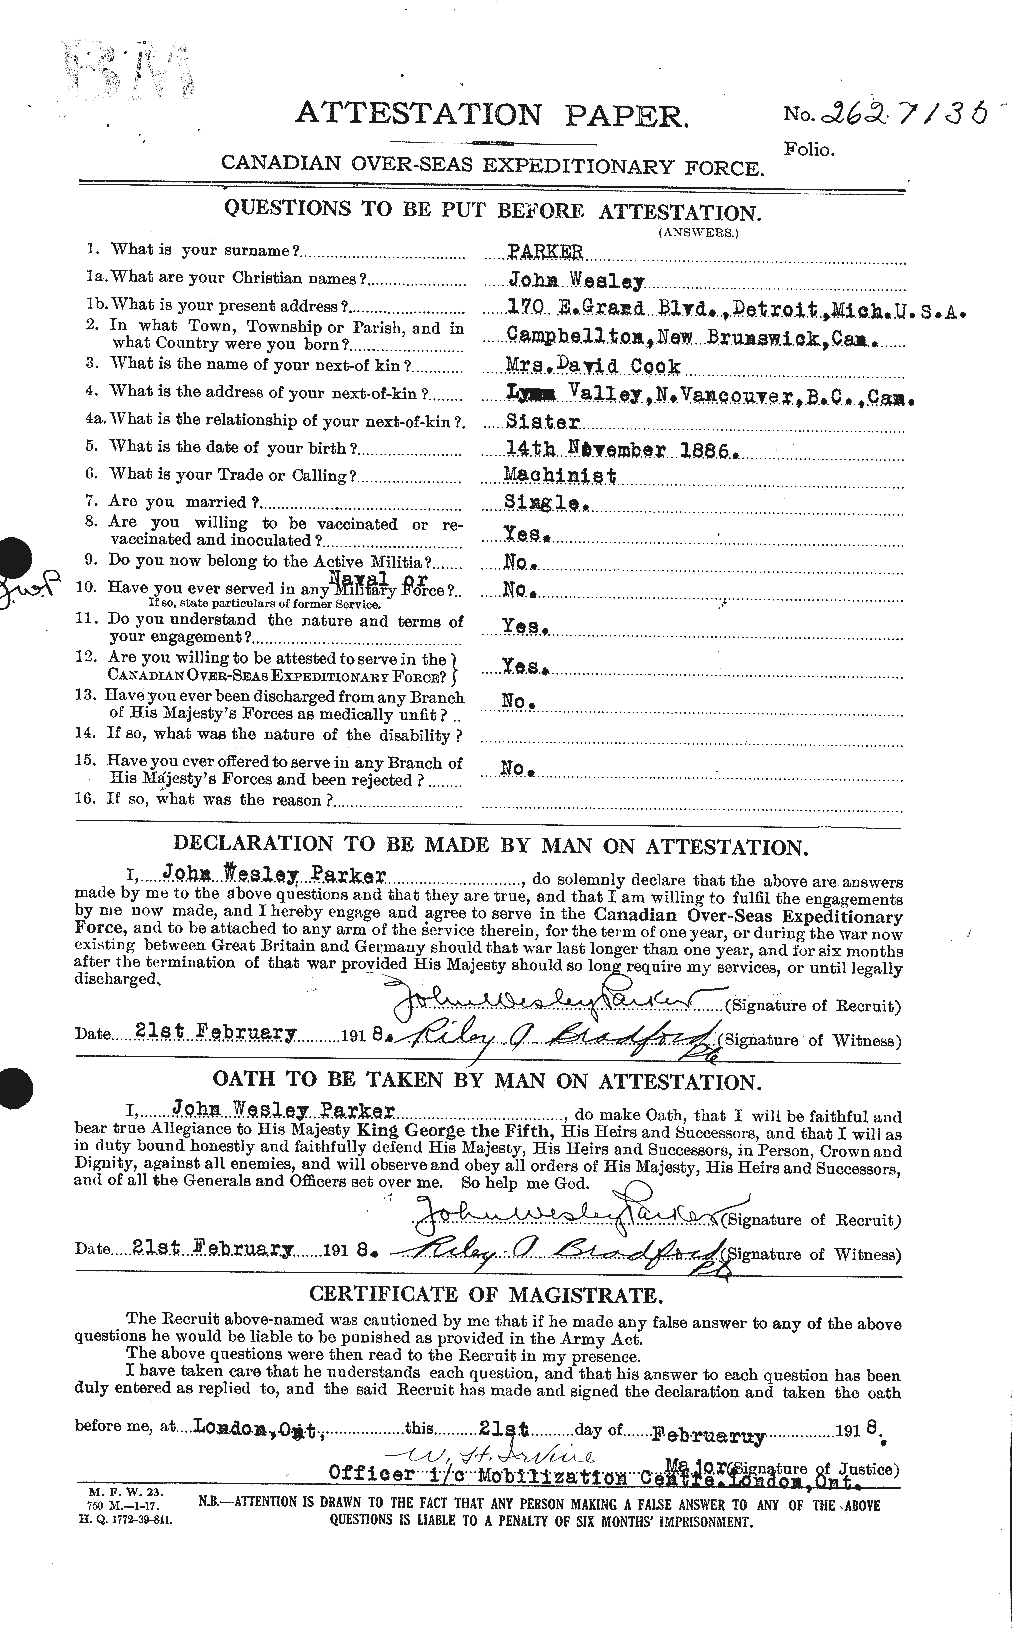 Personnel Records of the First World War - CEF 565492a